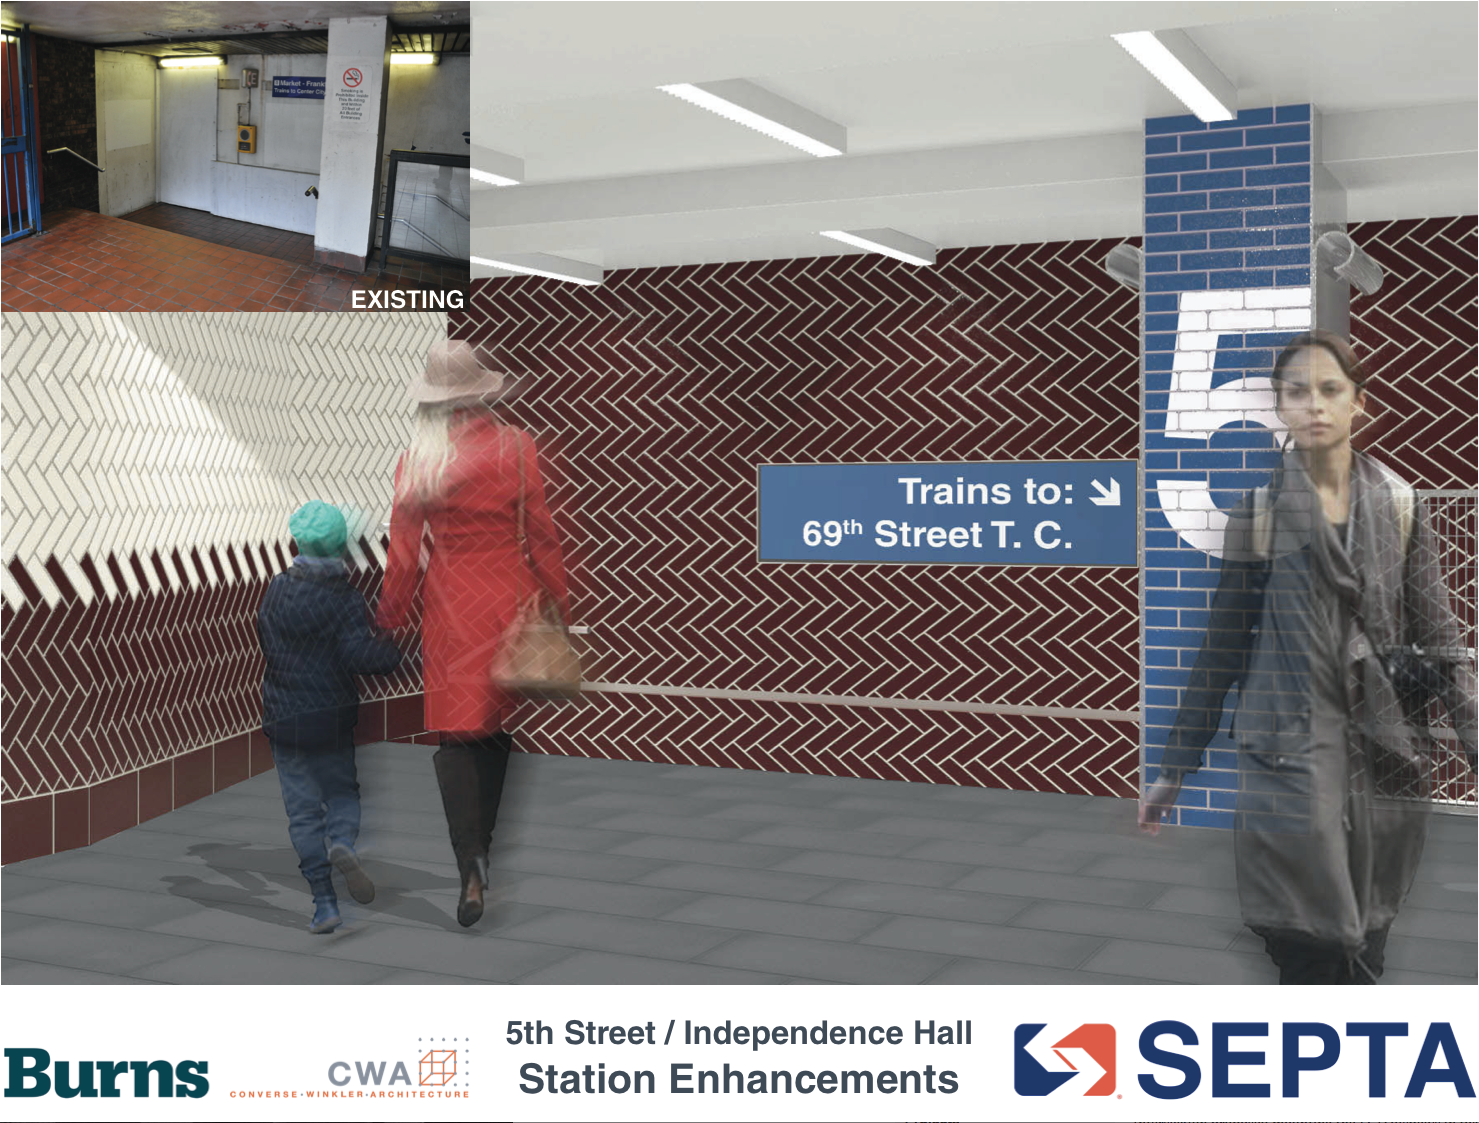 5th Street / Independence Hall: Mezzanine rendering | courtesy of SEPTA